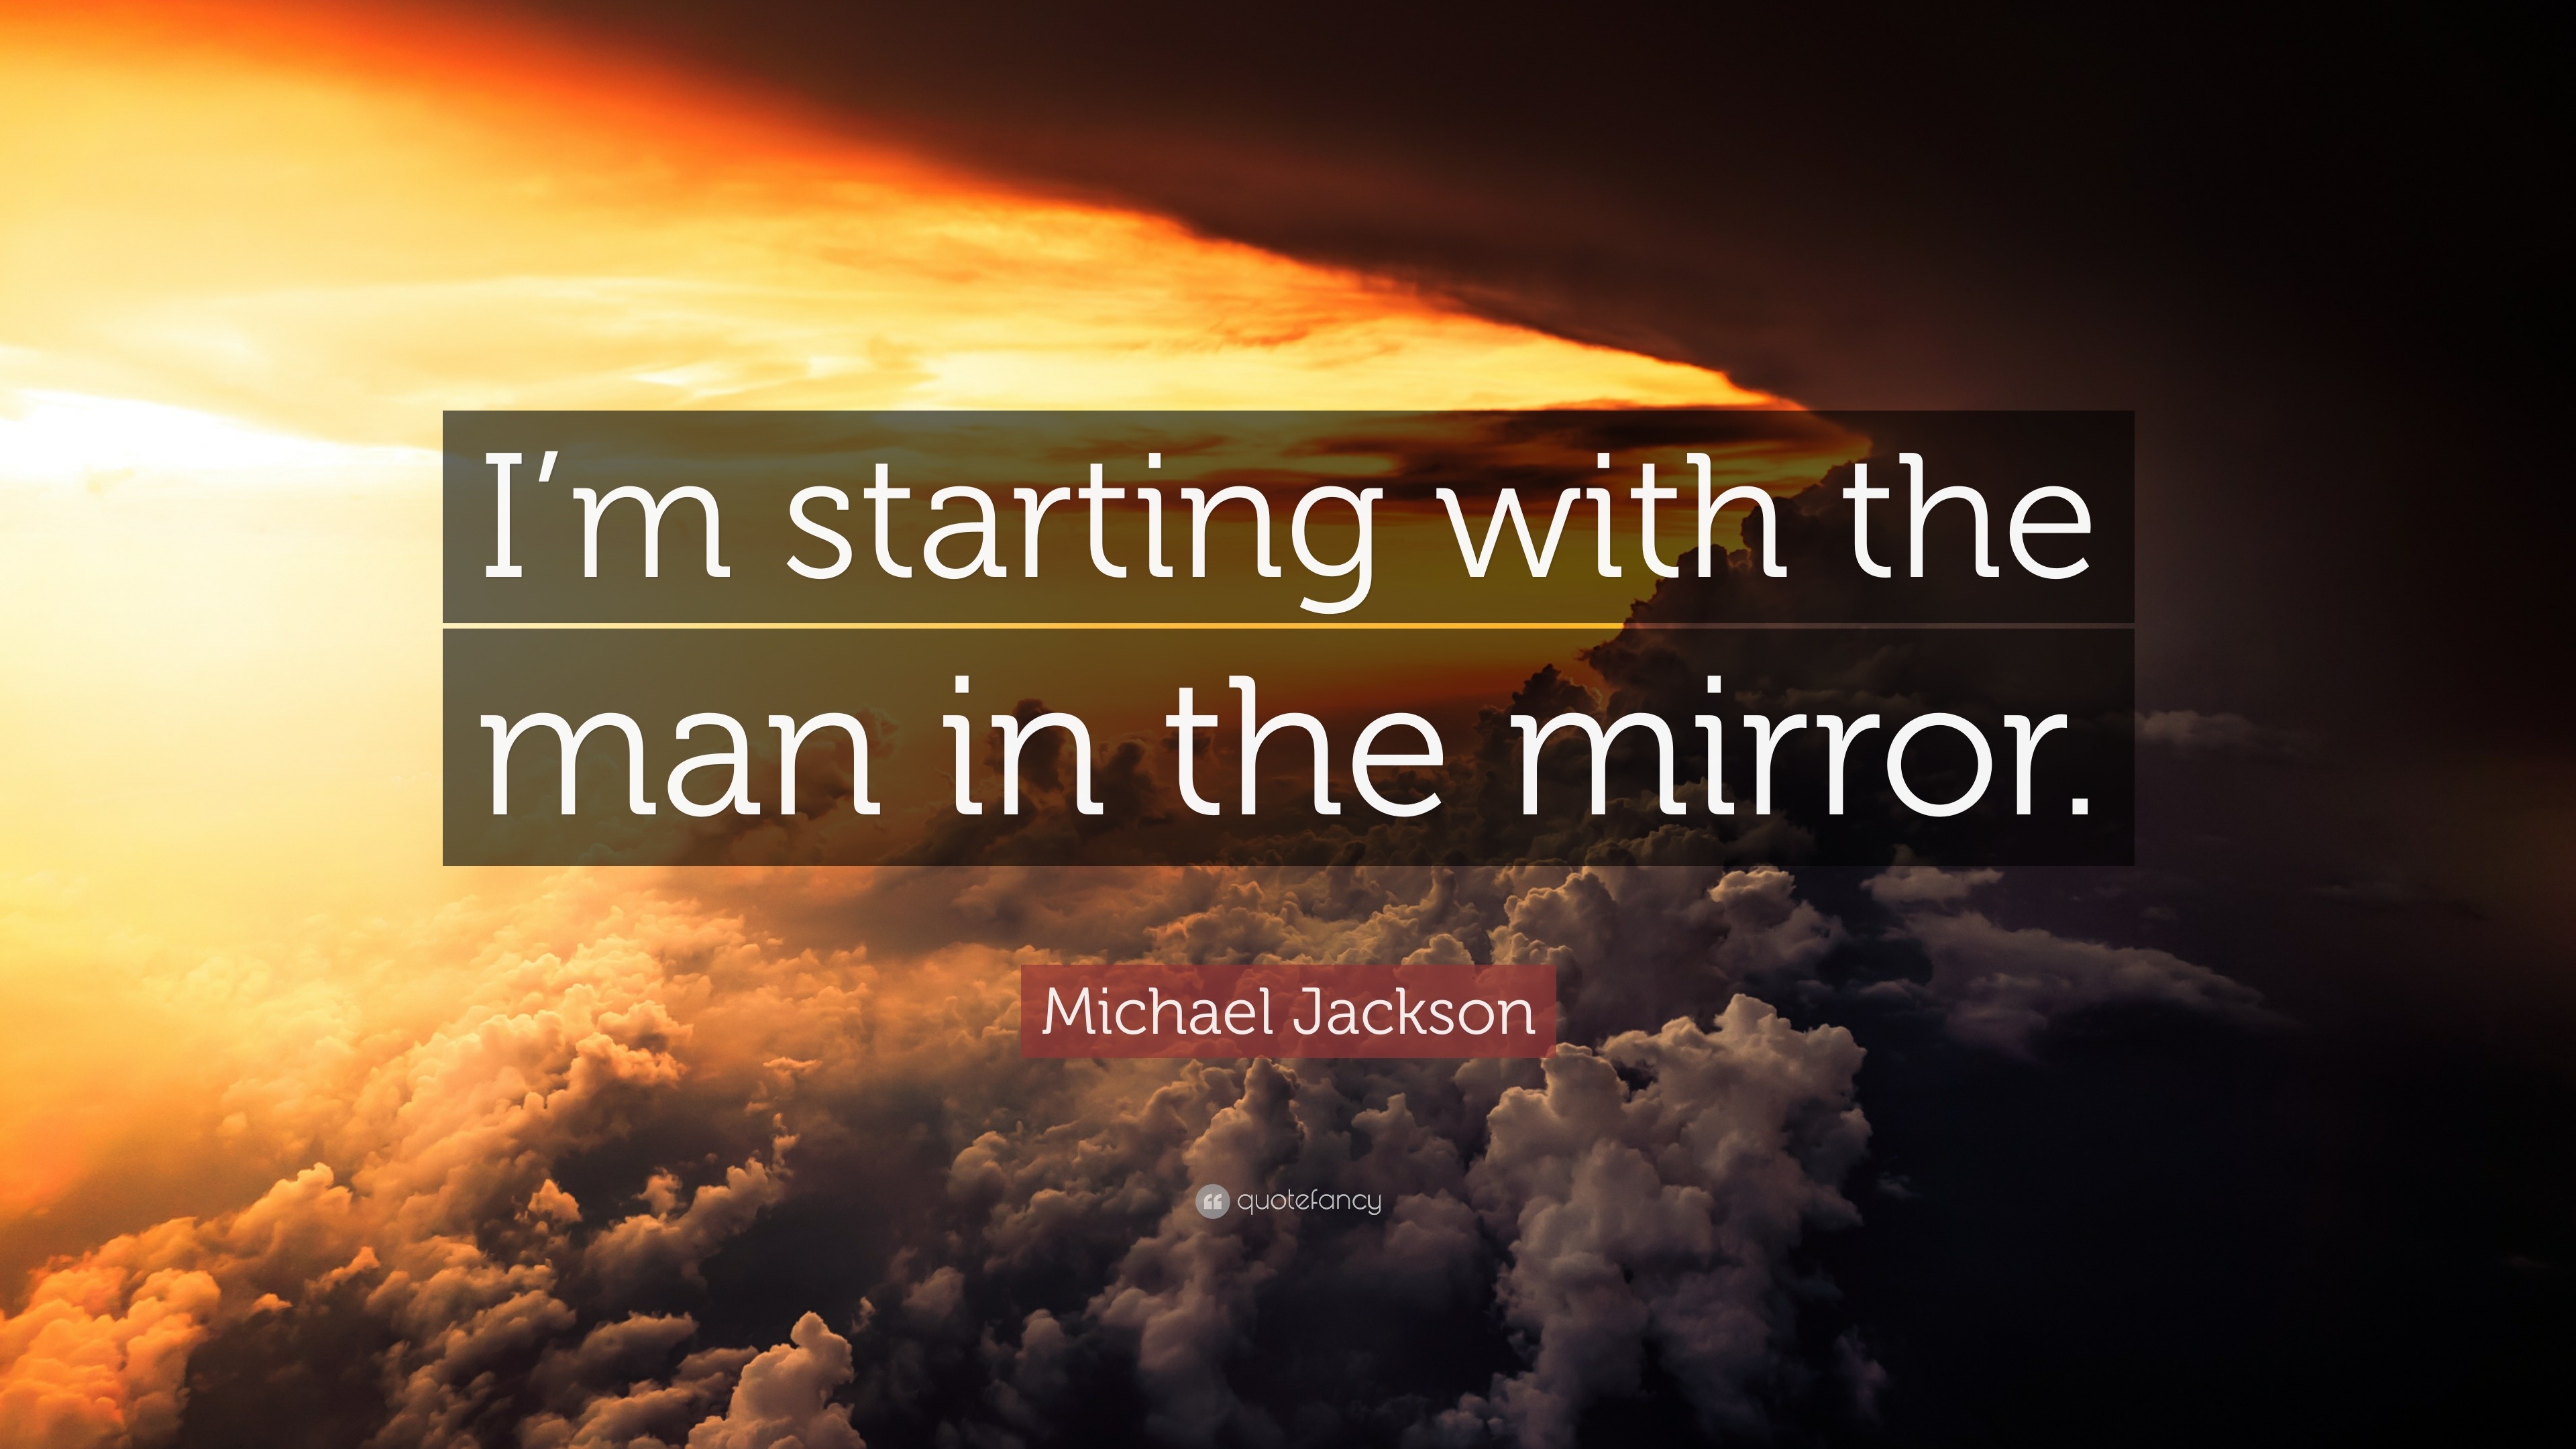 Michael Jackson Quote: "I'm starting with the man in the mirror." (12 wallpapers) - Quotefancy